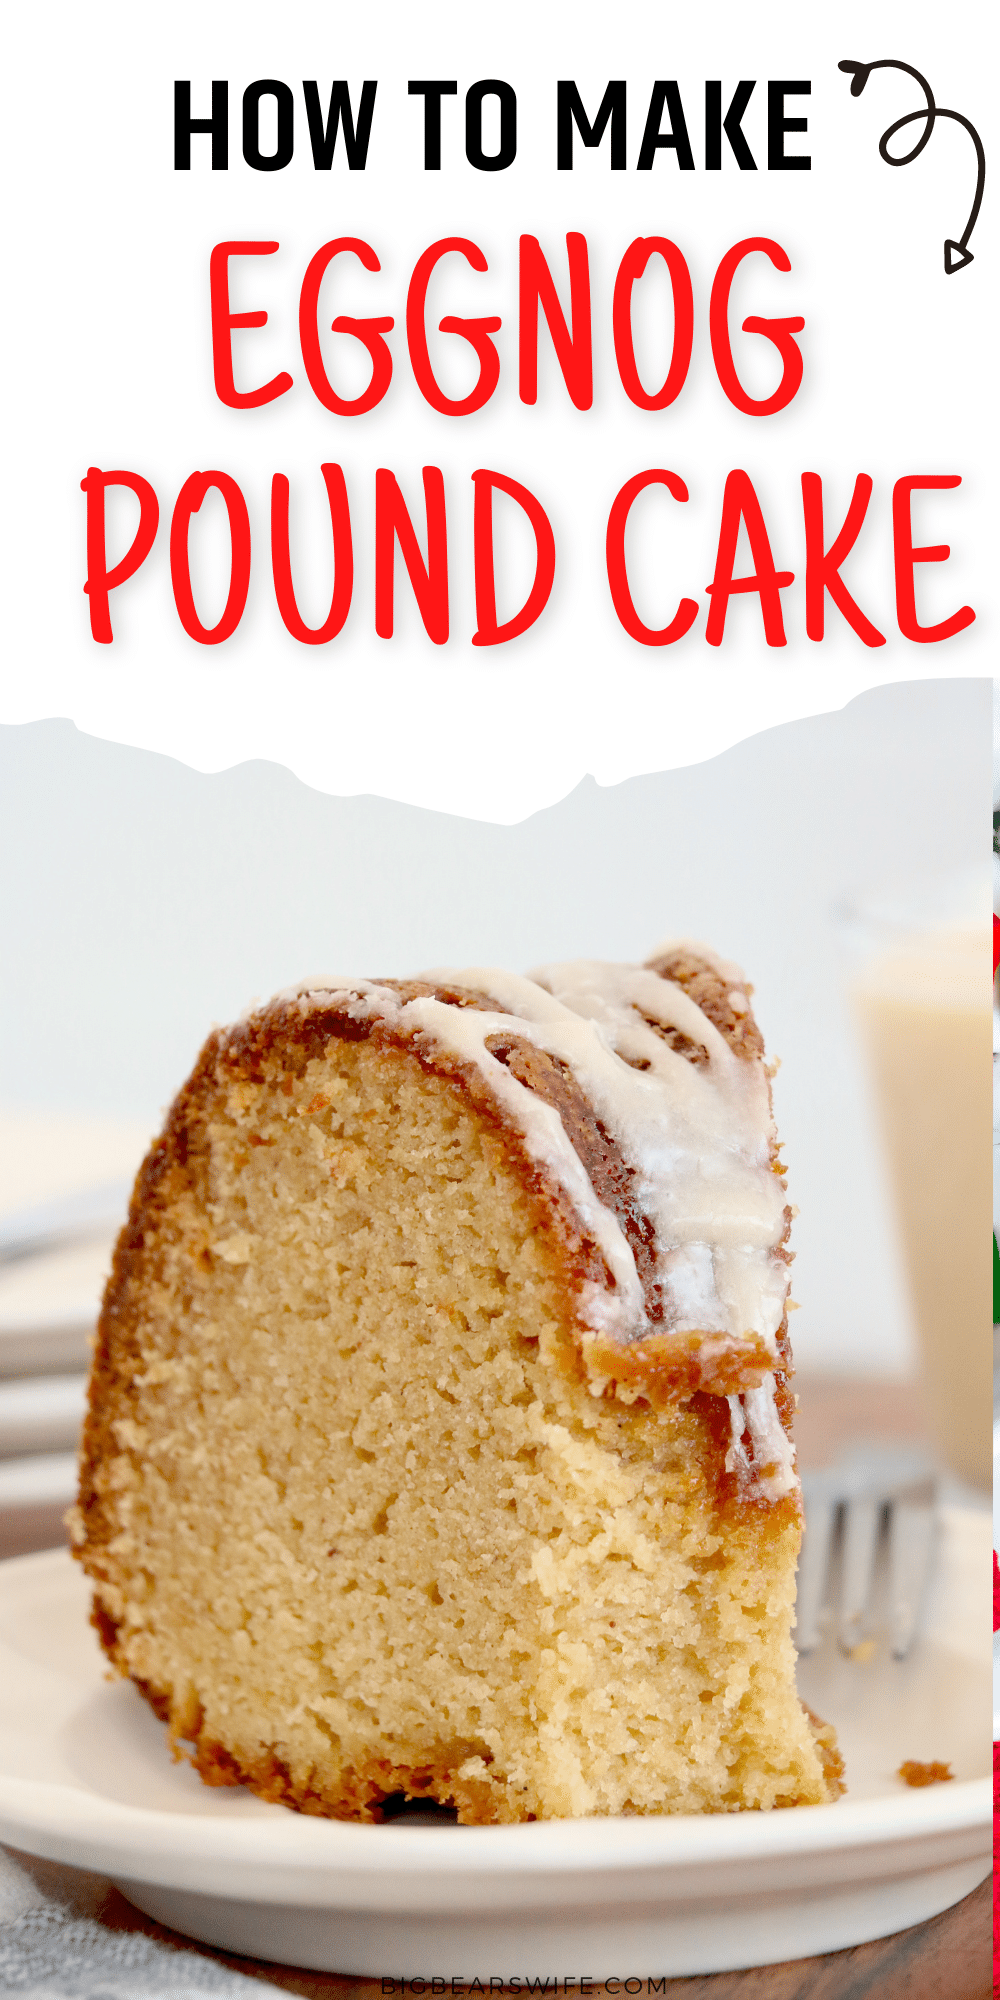 This Eggnog Pound Cake is a gorgeous holiday cake that is perfect with a cup of coffee or hot chocolate. This cake is a homemade eggnog pound cake that is baked in a bundt pan and then drizzled with eggnog icing! via @bigbearswife